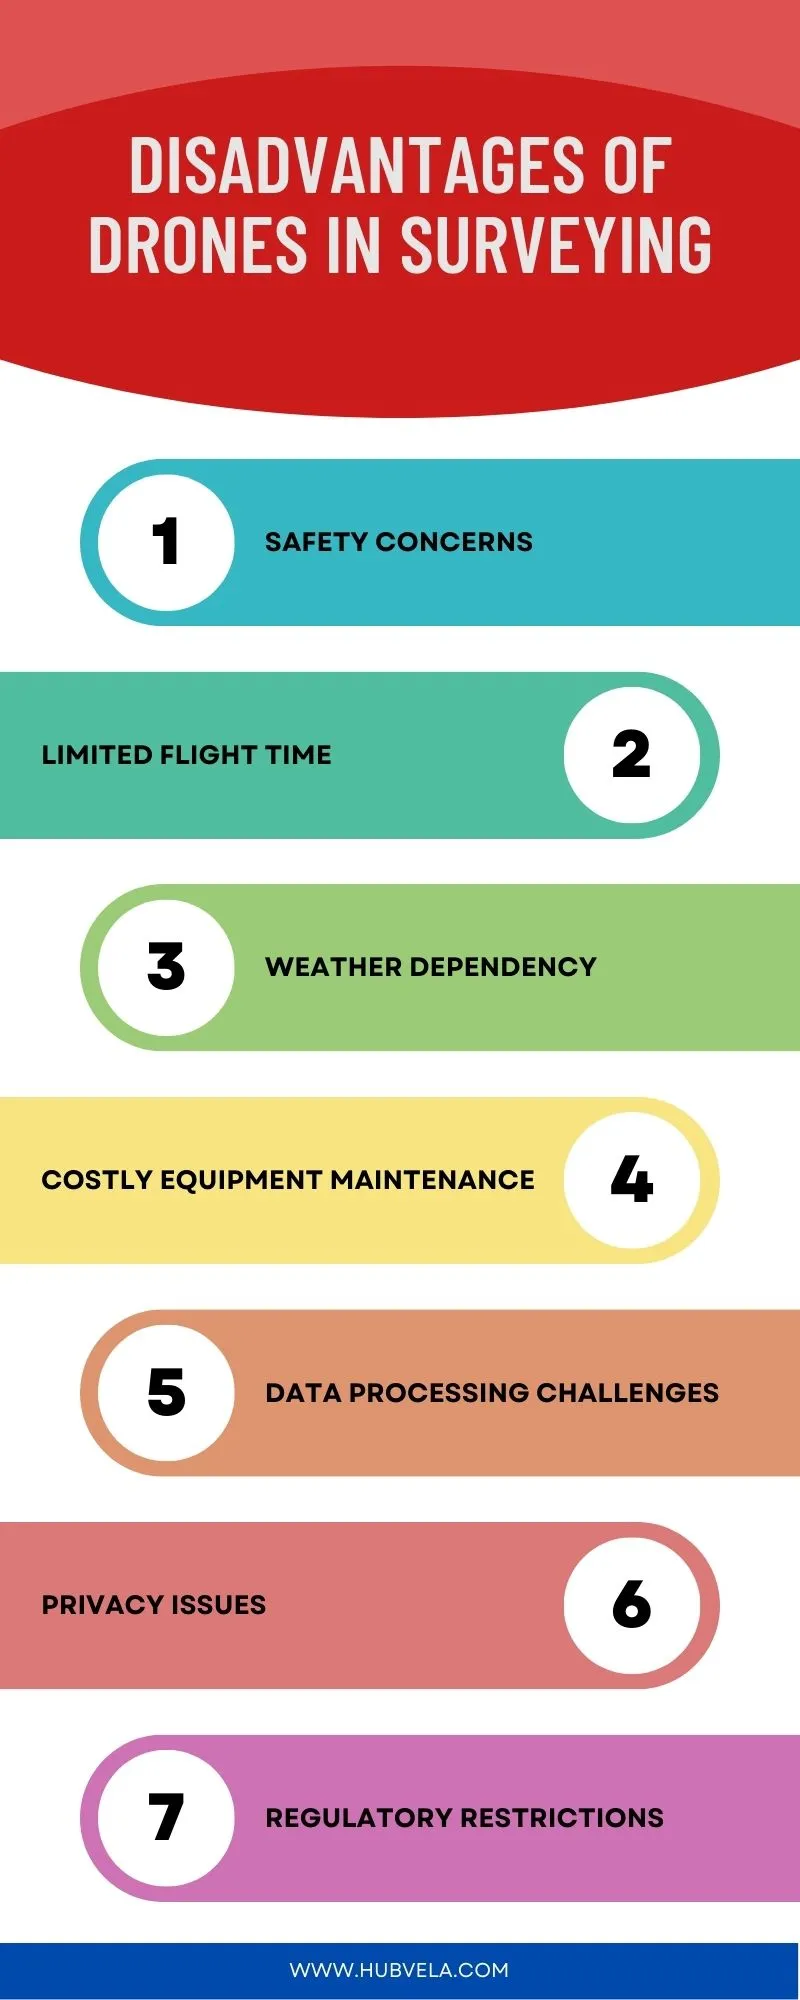 Disadvantages of Drones in Surveying Infographic